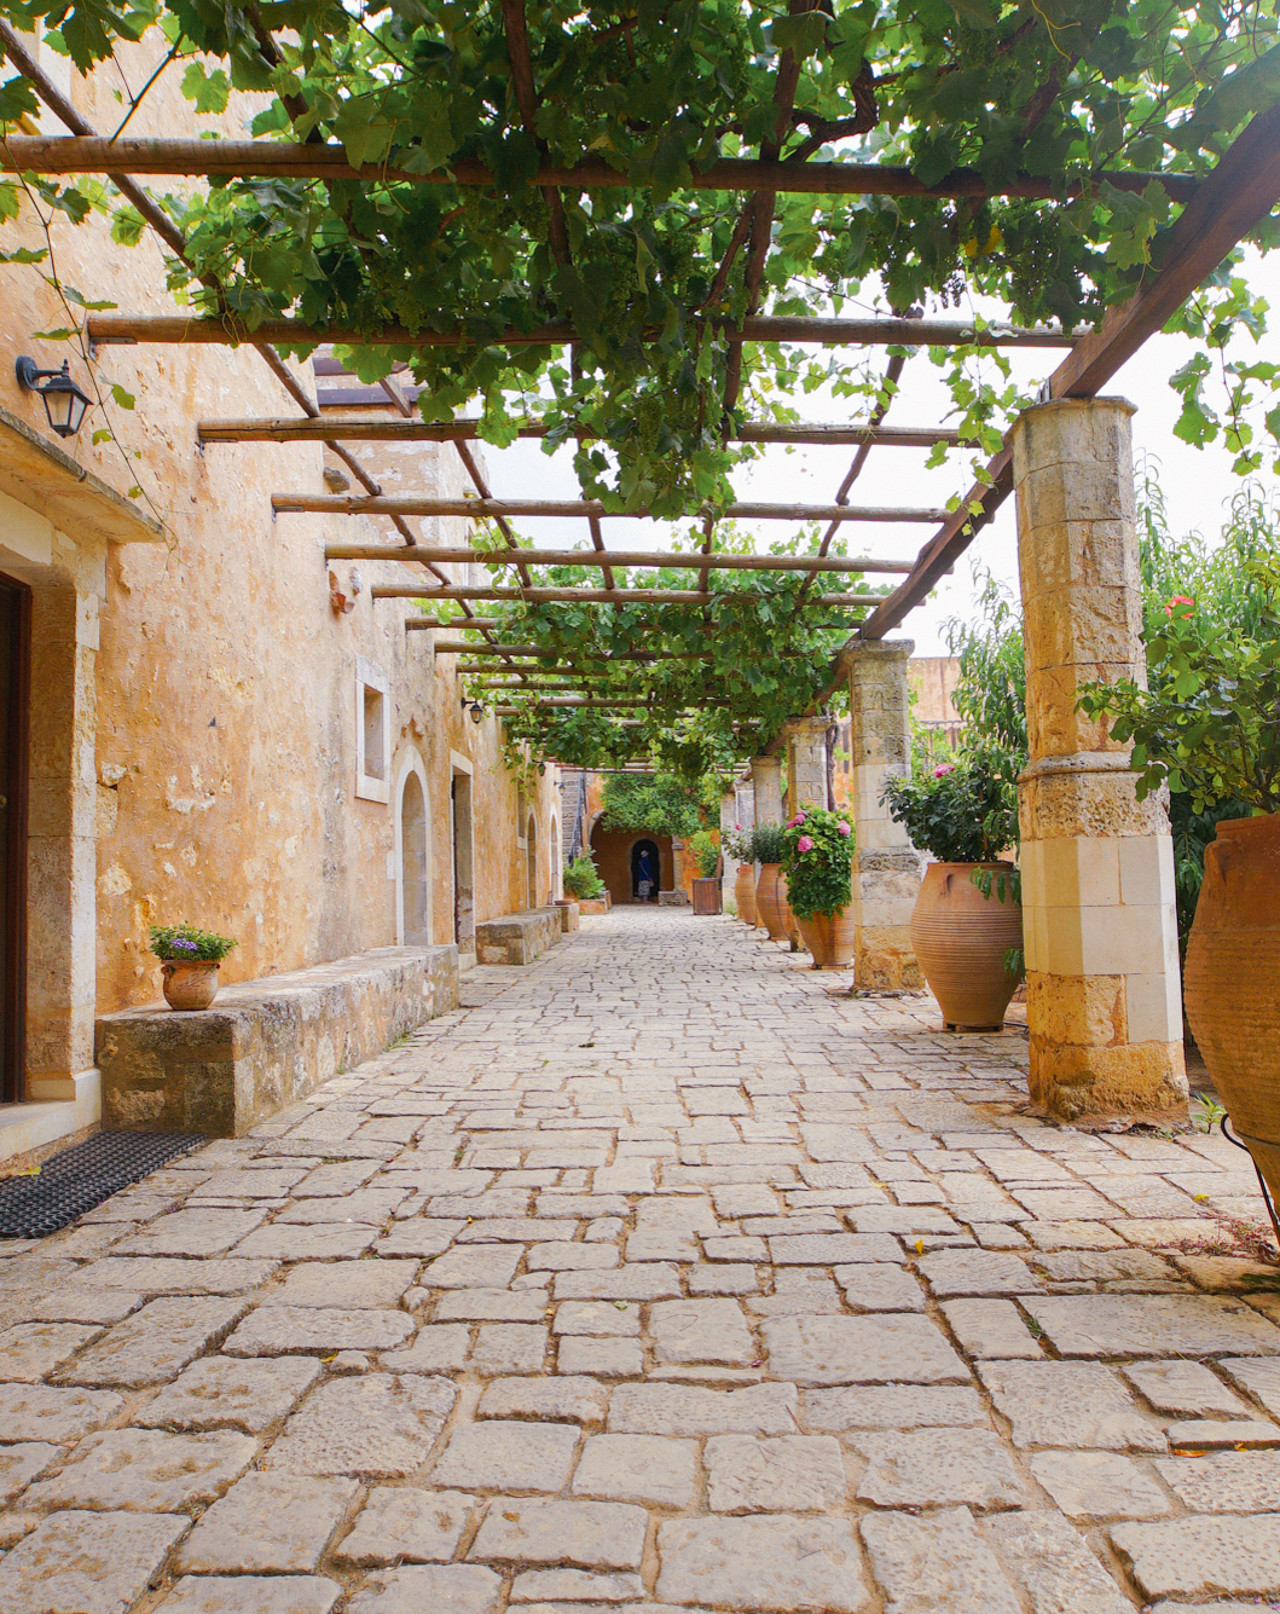 A paved courtyard in Crete’s Arkadi Monastery